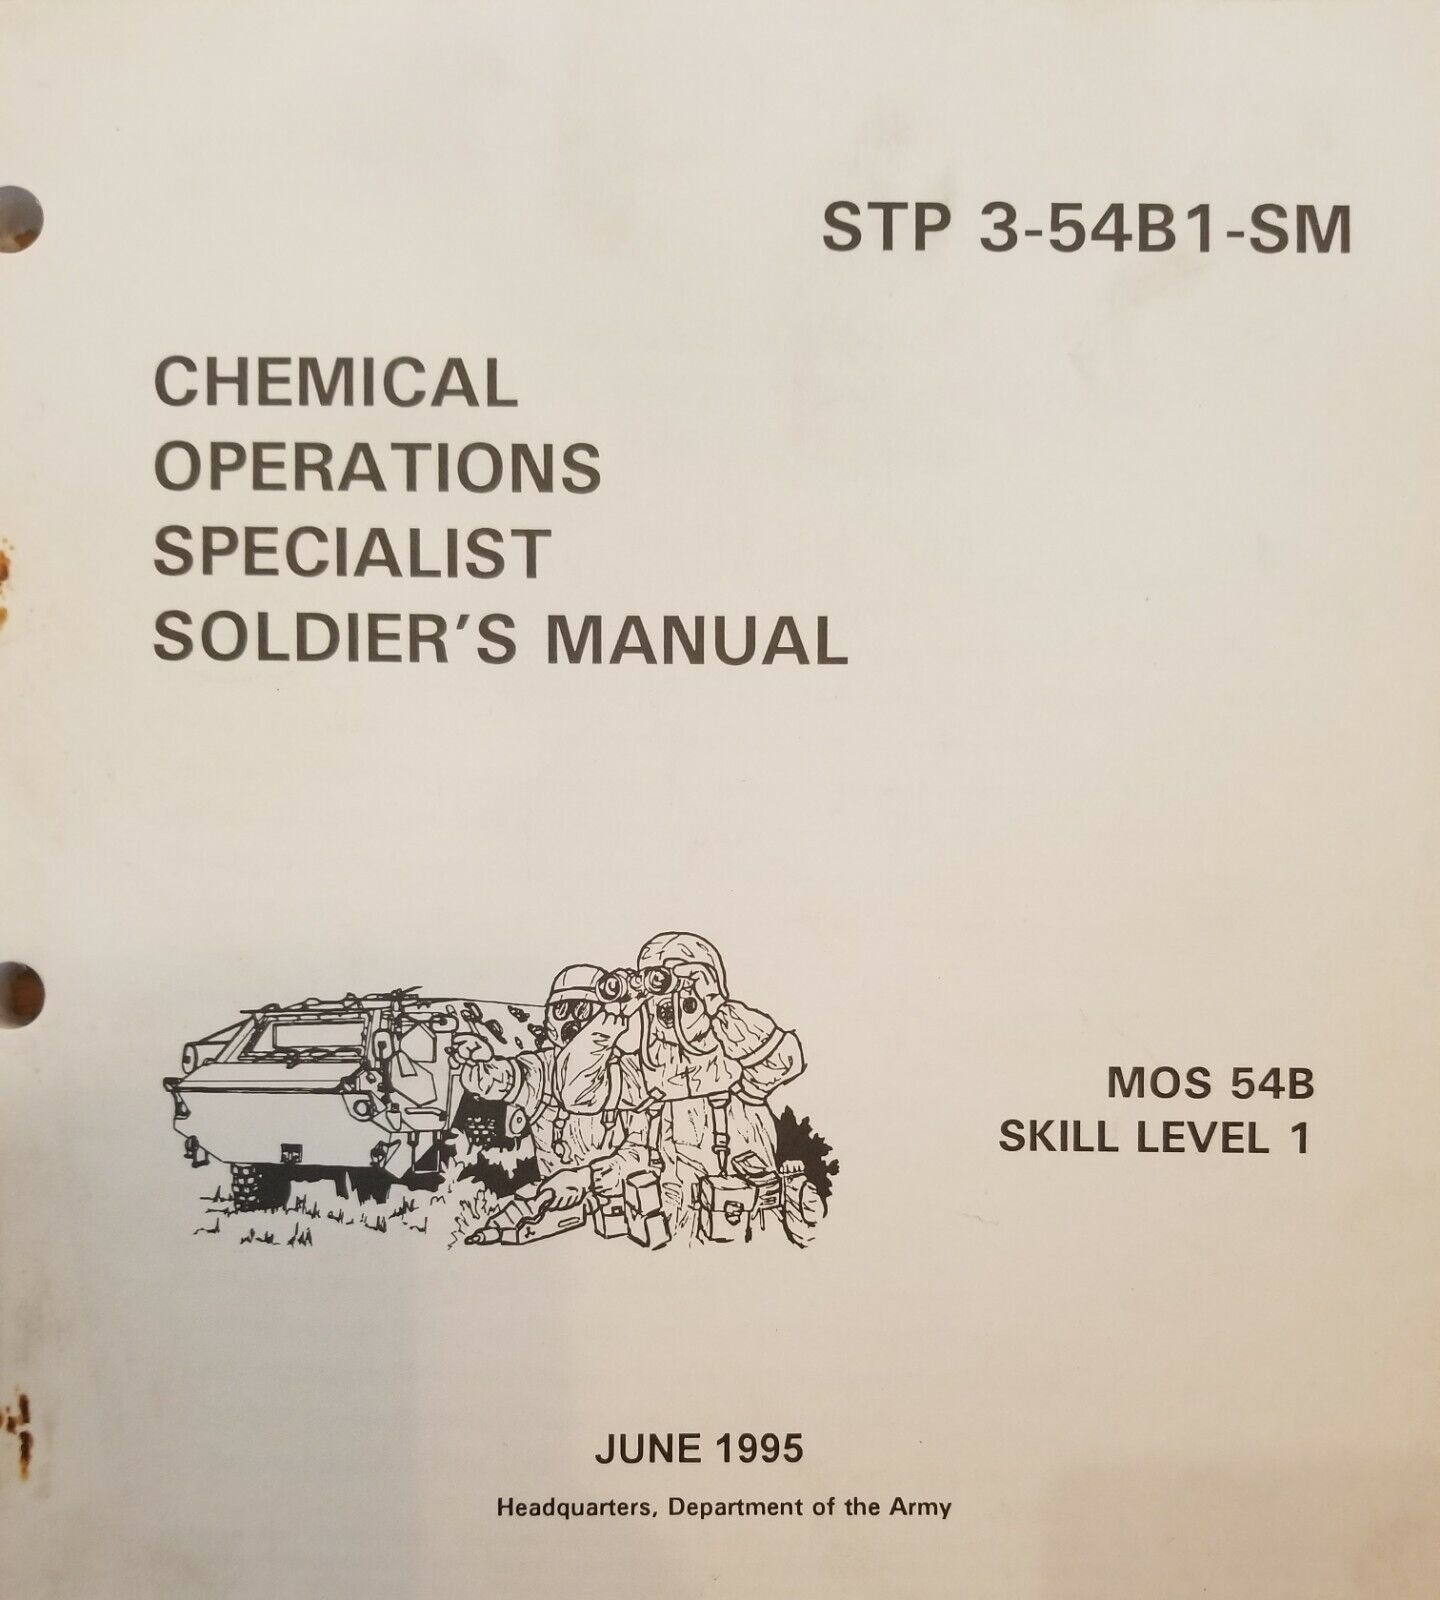 STP 3-54B1-SM Chemical Operations Specialist Soldier\'s Manual, MOS 54B SL1 1995